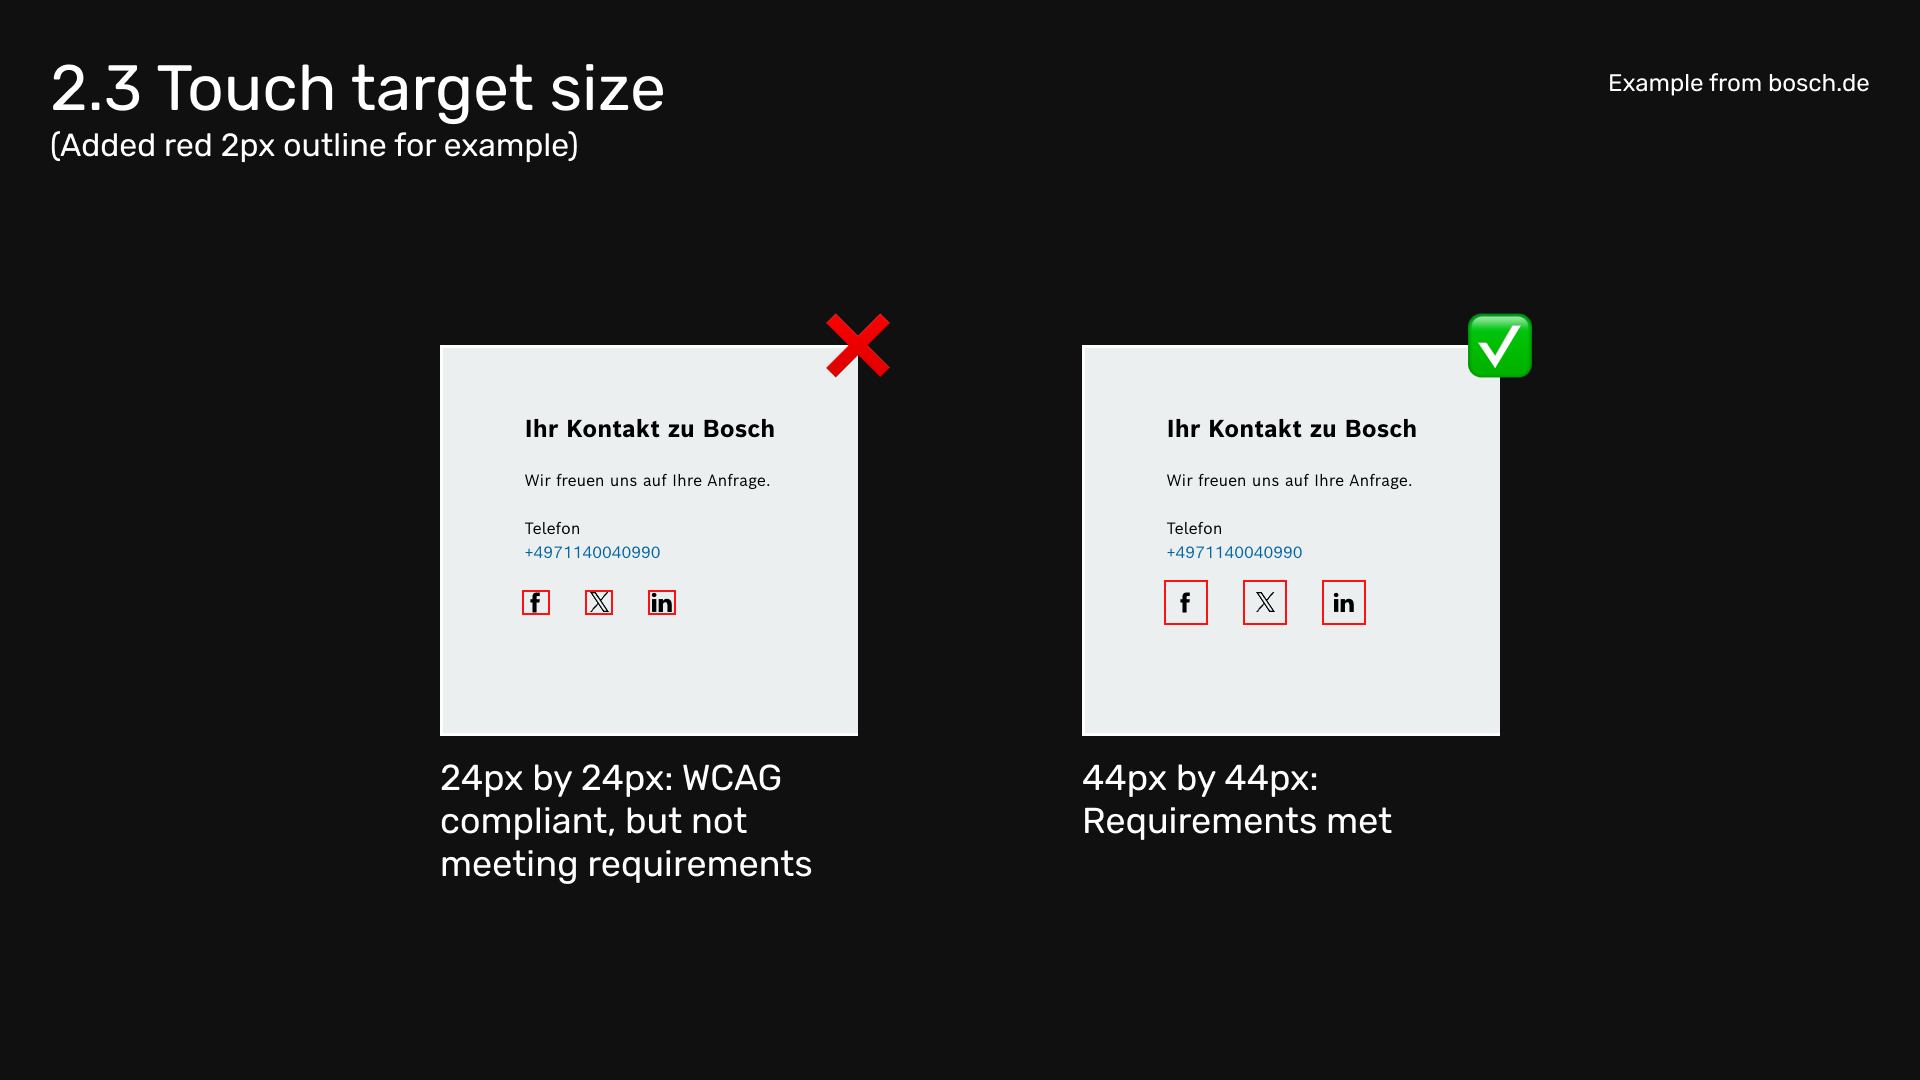 Illustration showcasing the difference of touch target sizes on the german Bosch website. Both images show a section of the footer, with three social media icons having a 2 pixel solid red broder around the, to visualise the target size. The first one's target size is too small with only 24 by 24 pixel (yet meeting the WCAG requirement). The second one's sufficient with 44 by 44 pixel.